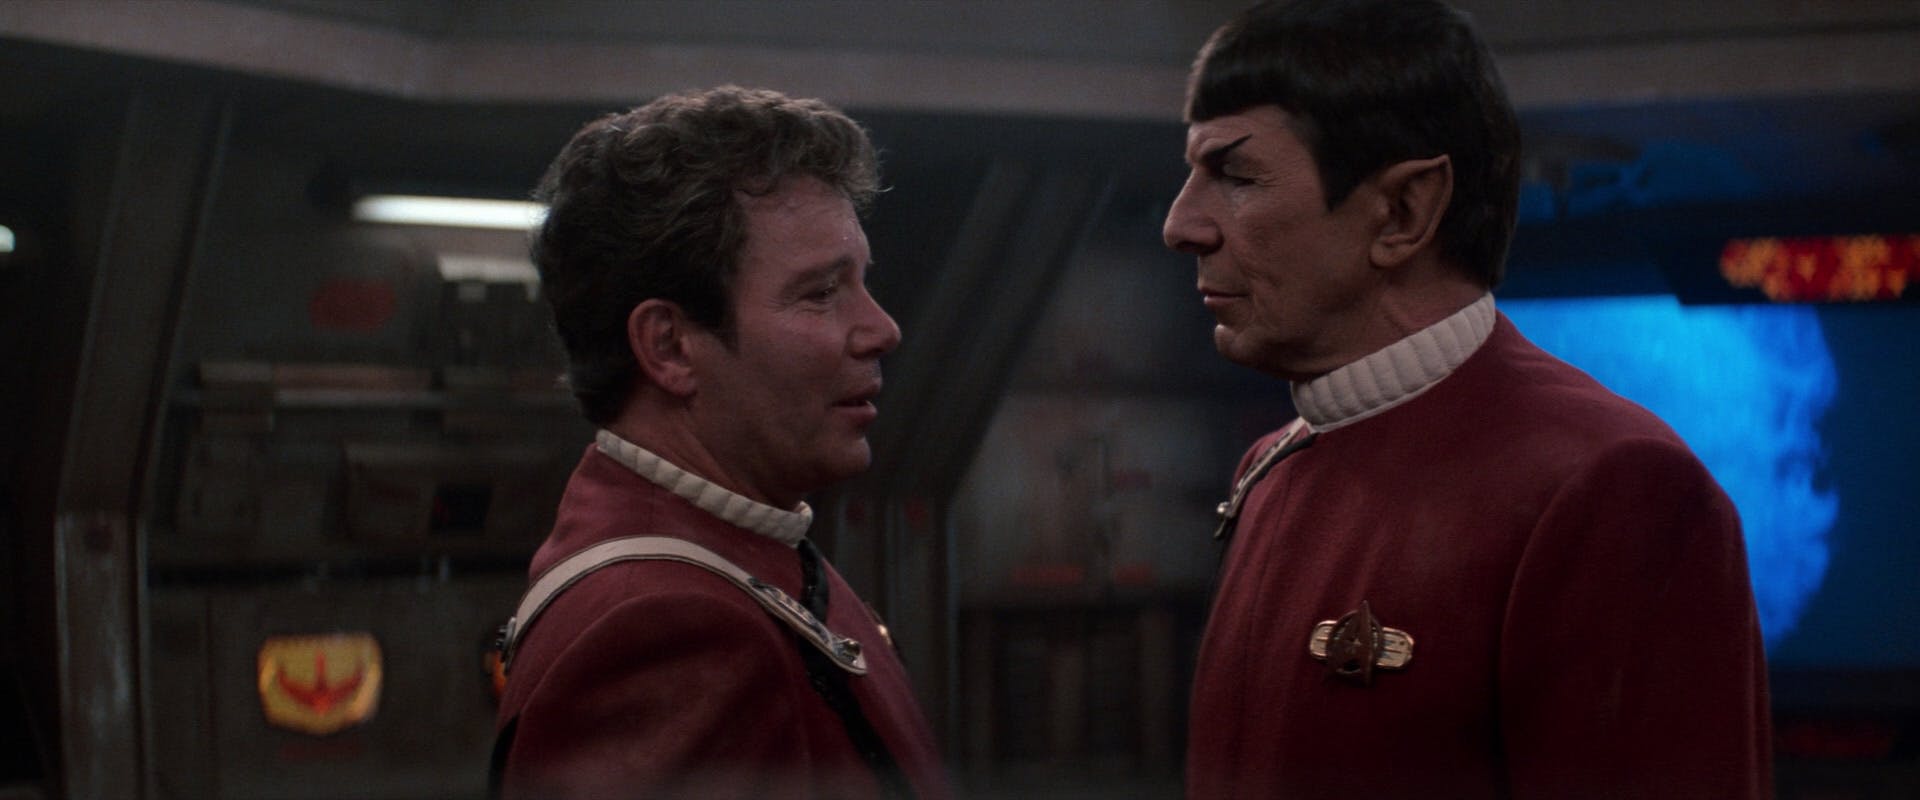 Spock reminds Kirk he was never alone in Star Trek V: The Final Frontier